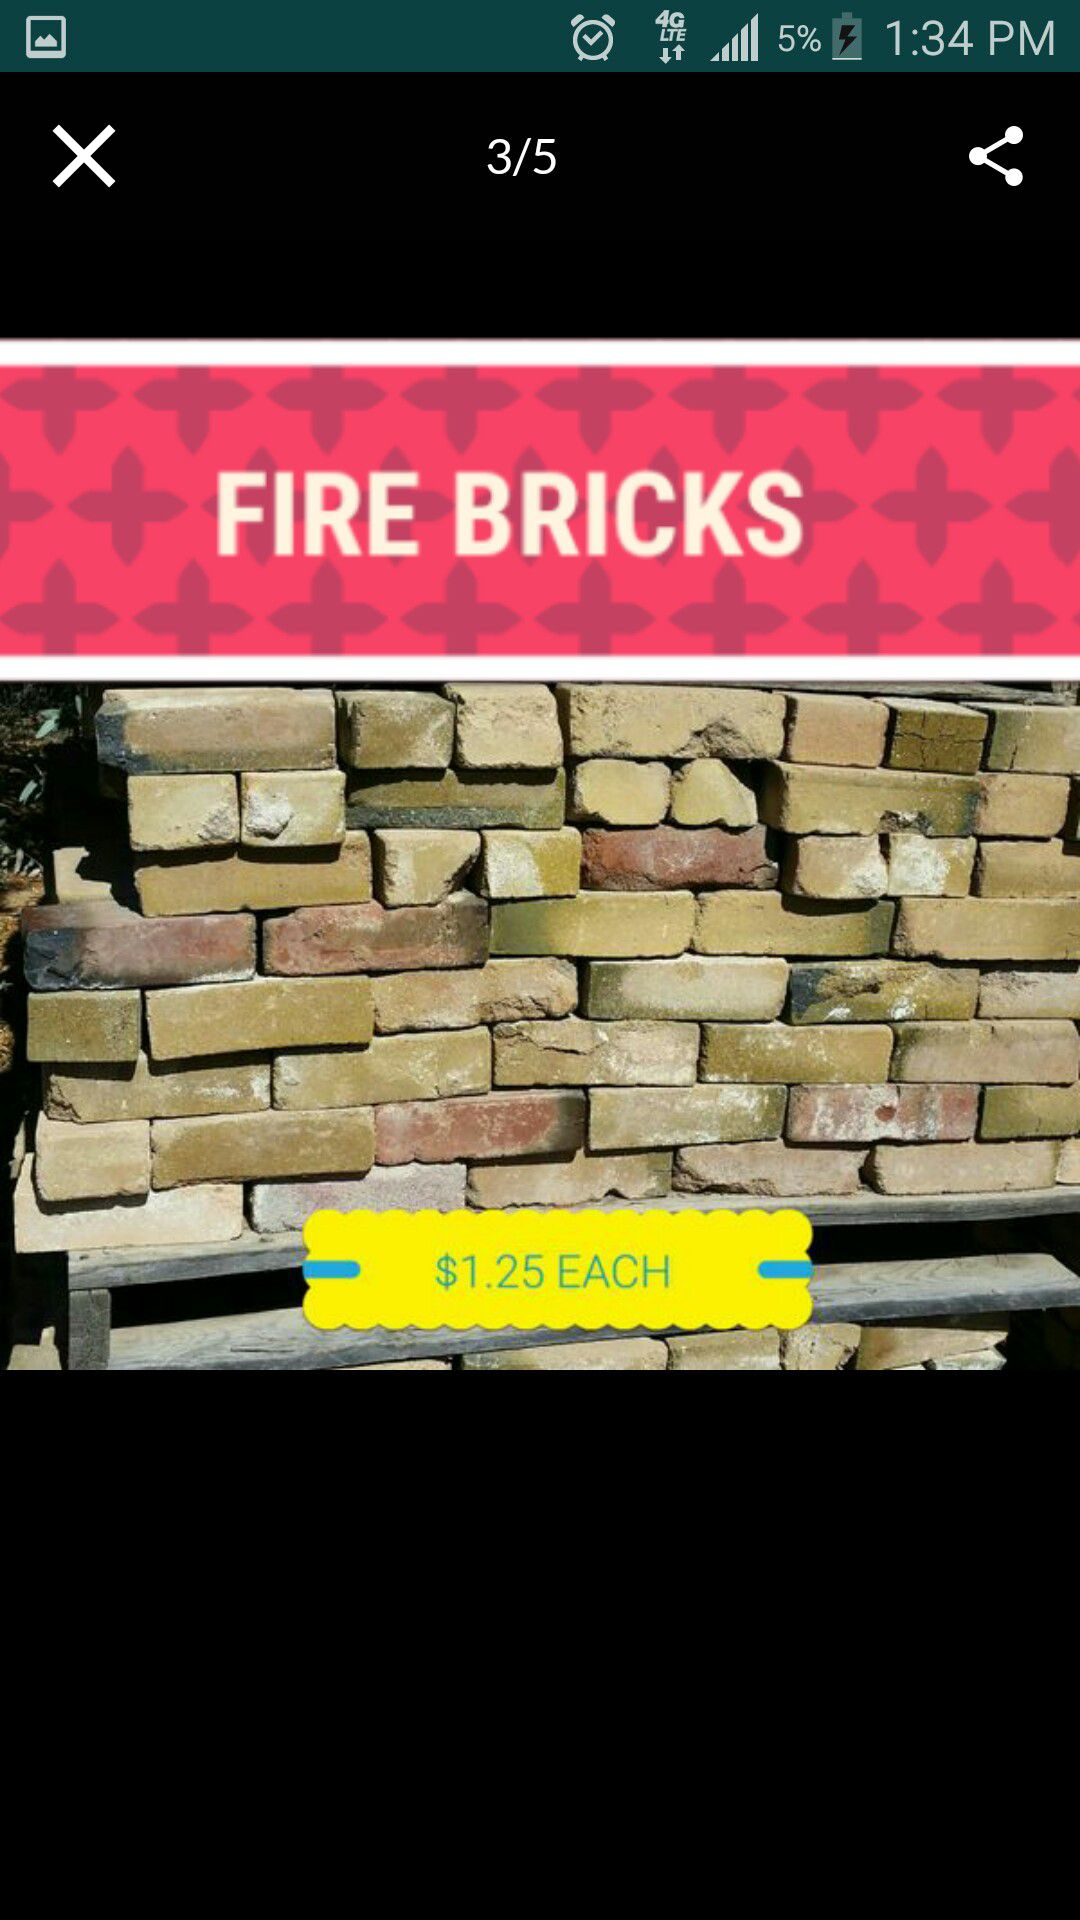 DIY PIZZA OVEN FIRE BRICK, $1.25 A BRICK, MAINLY YELLOW COLOR, BUT HAVE SOME RED, NO DELIVERY, WE HV A FORKLIFT, GOT TO BUY 50+, NORTHERN & i17